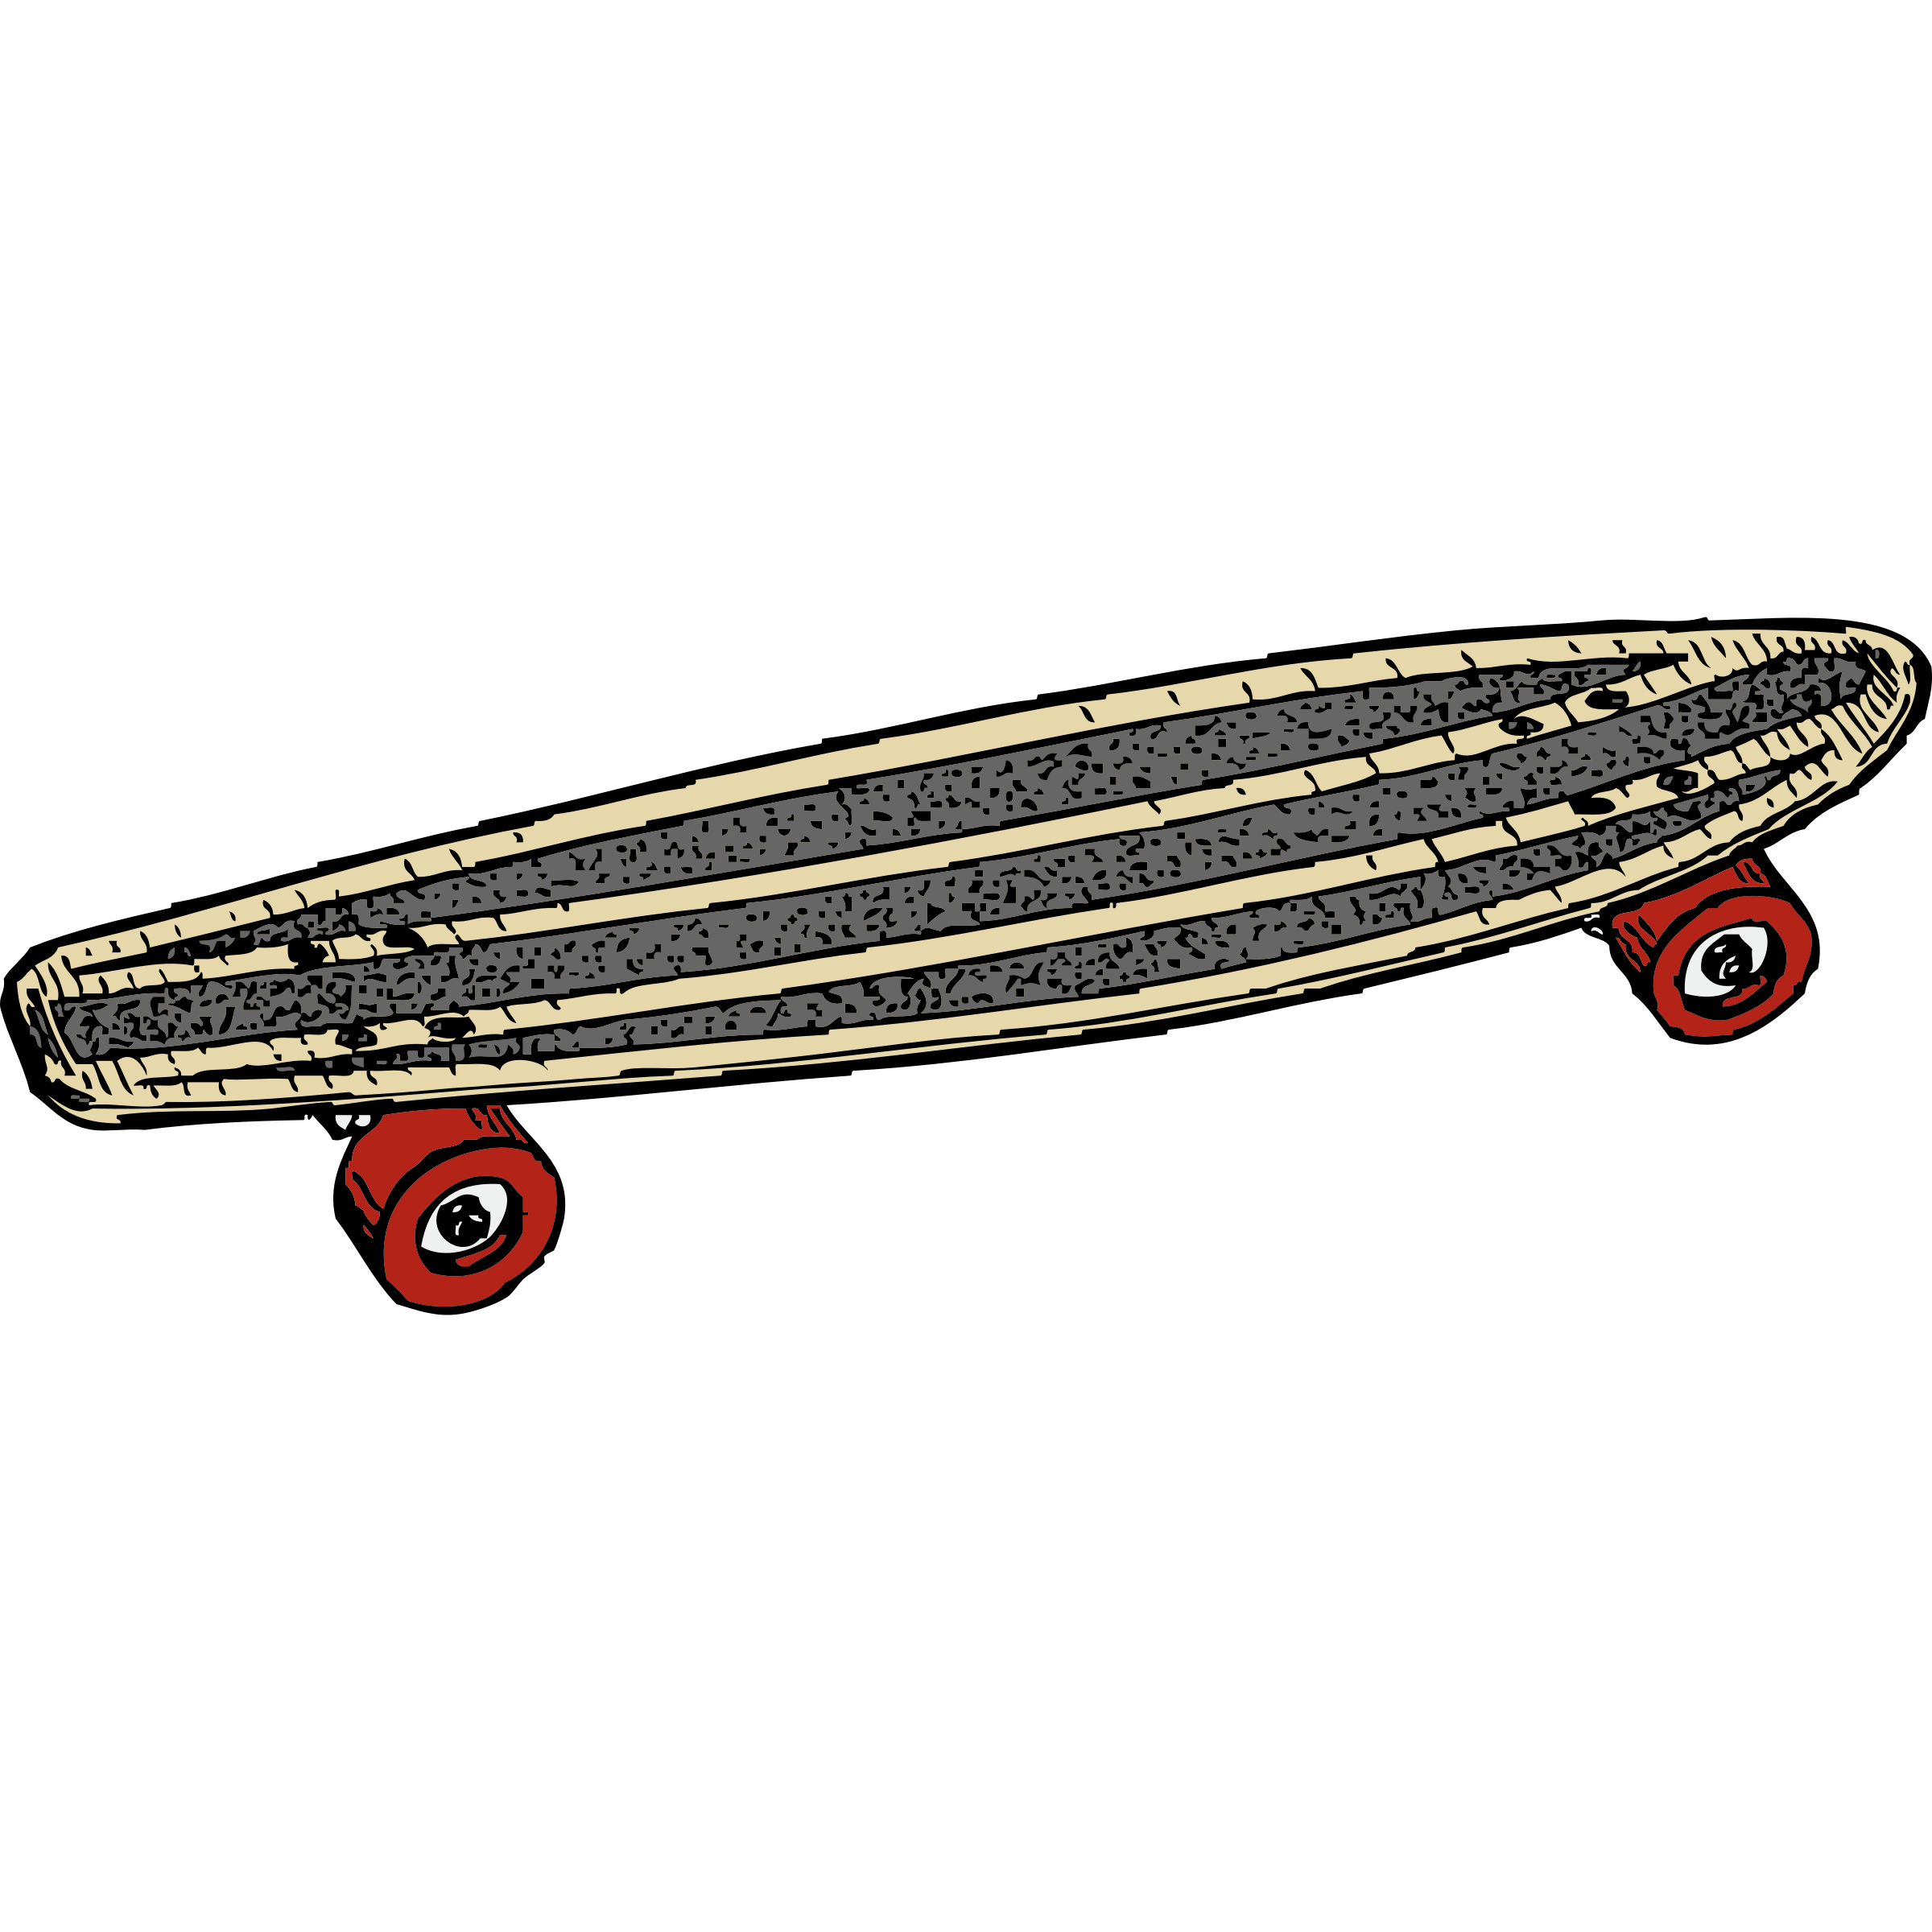 Ollie skateboarding concentrate clipart image